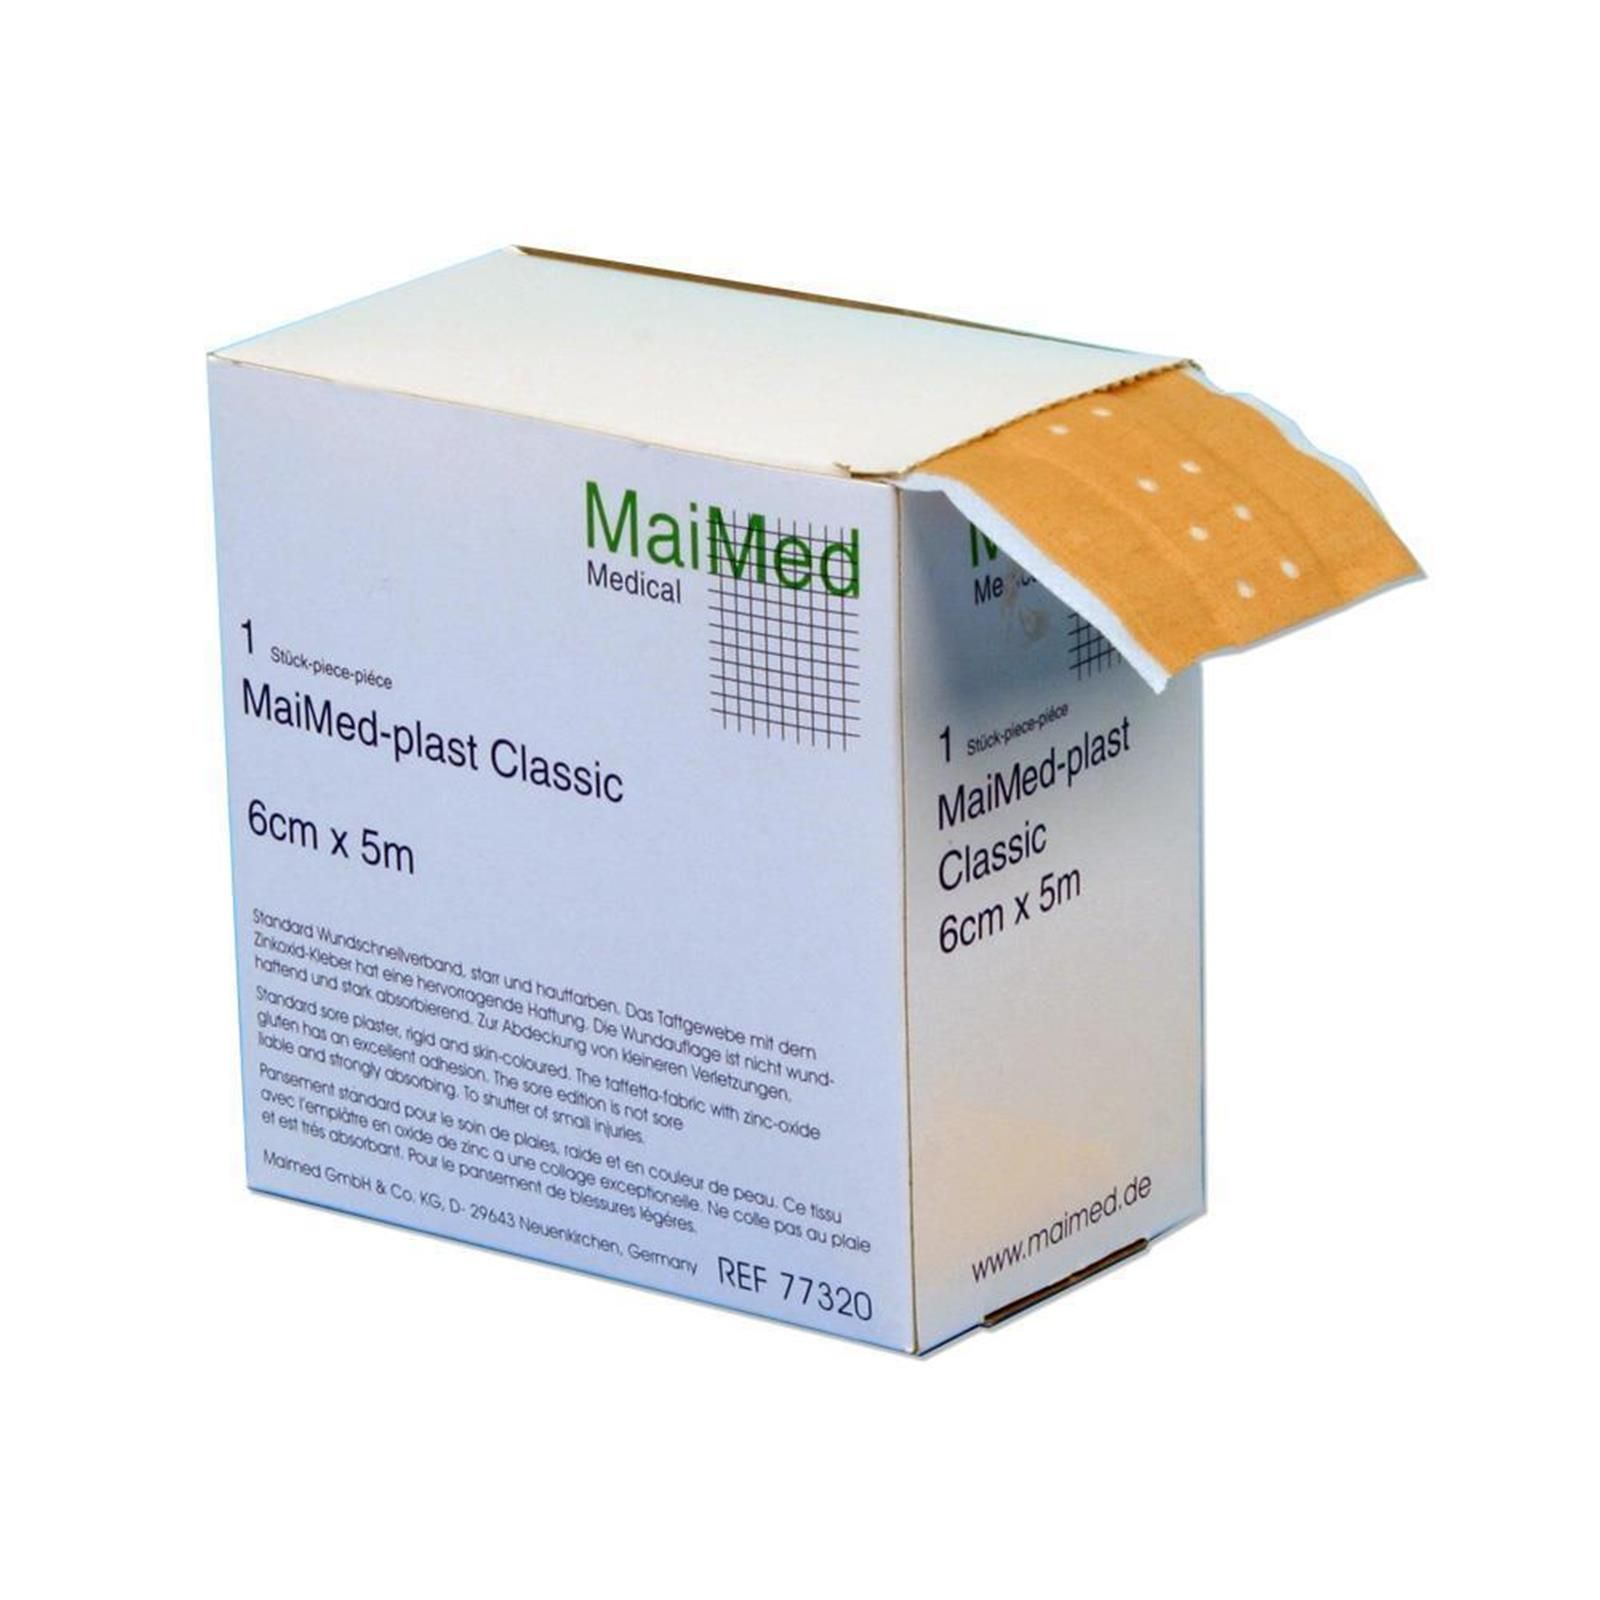 MaiMed Plast Classic Wundschnellverband 4 cm x 5 m